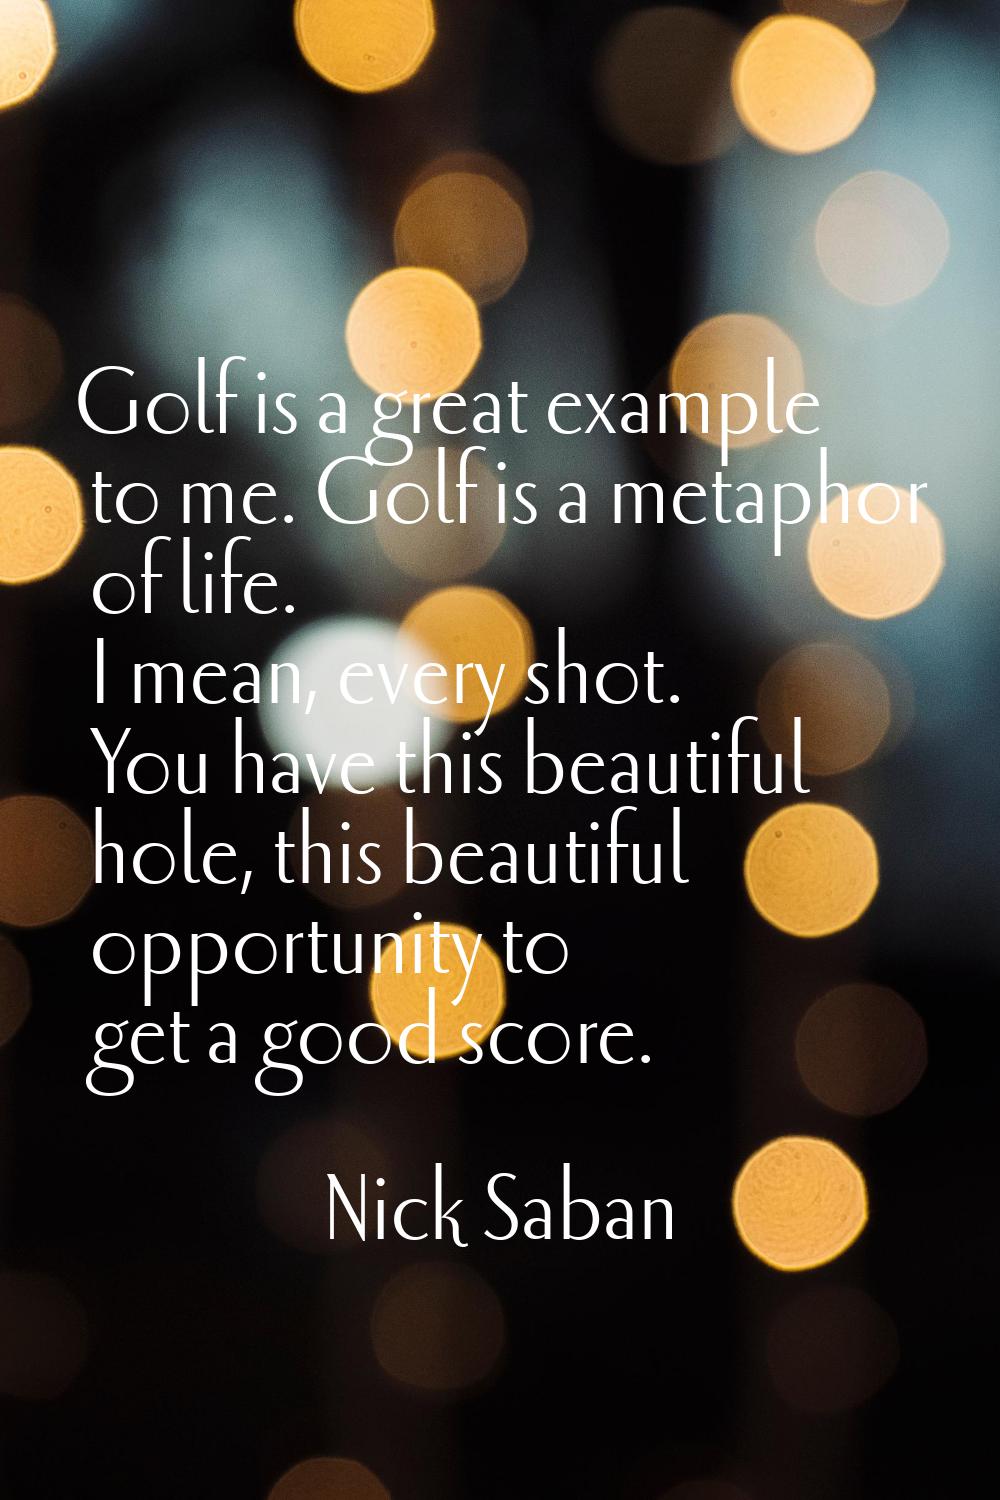 Golf is a great example to me. Golf is a metaphor of life. I mean, every shot. You have this beauti